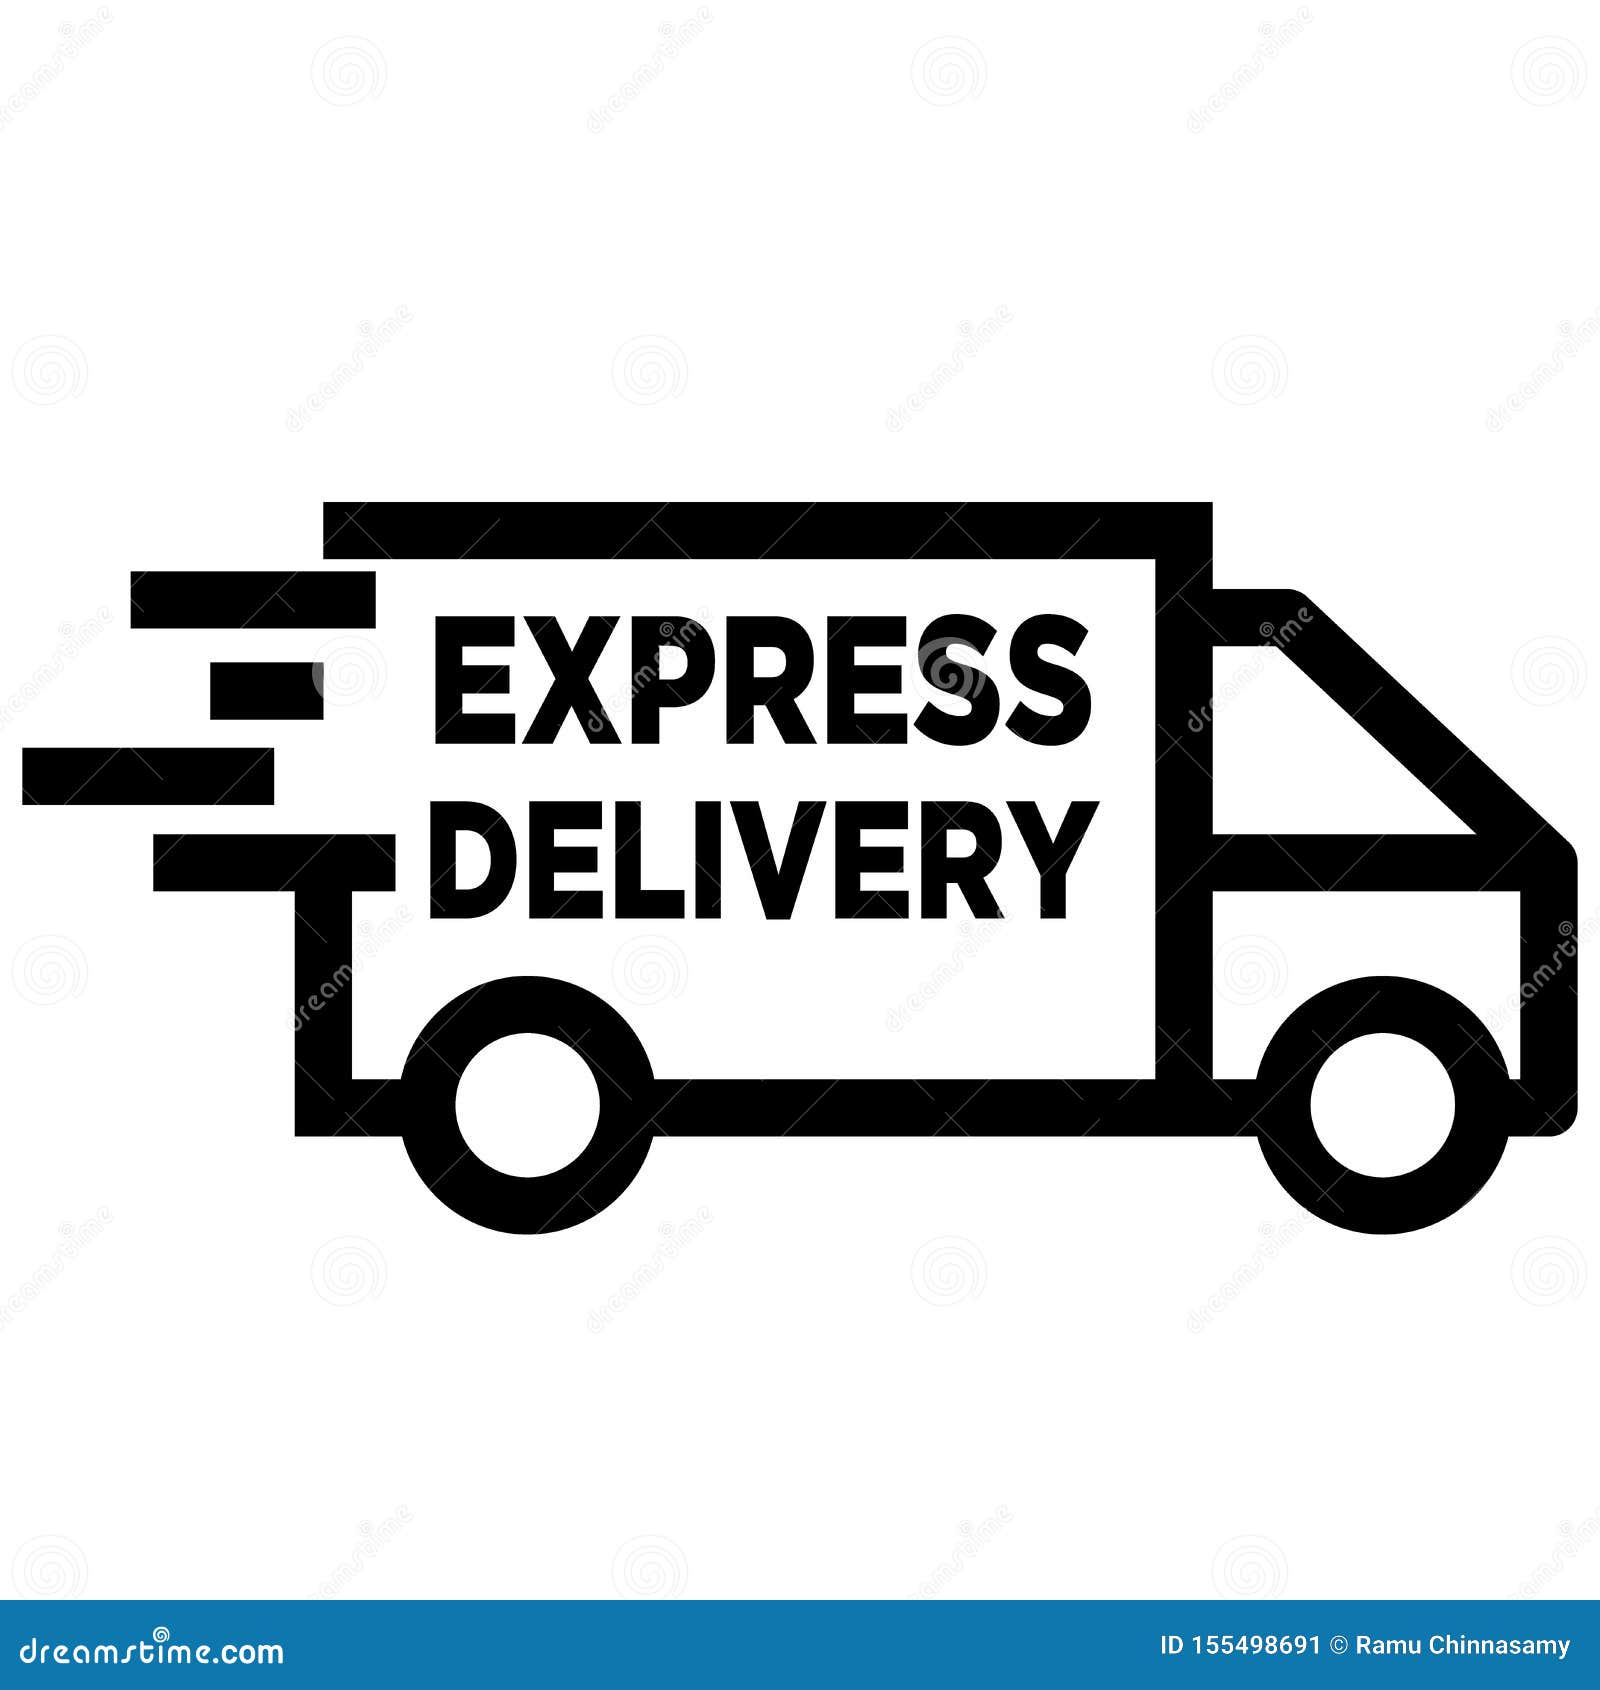 Express delivery icon stock vector. Illustration of element